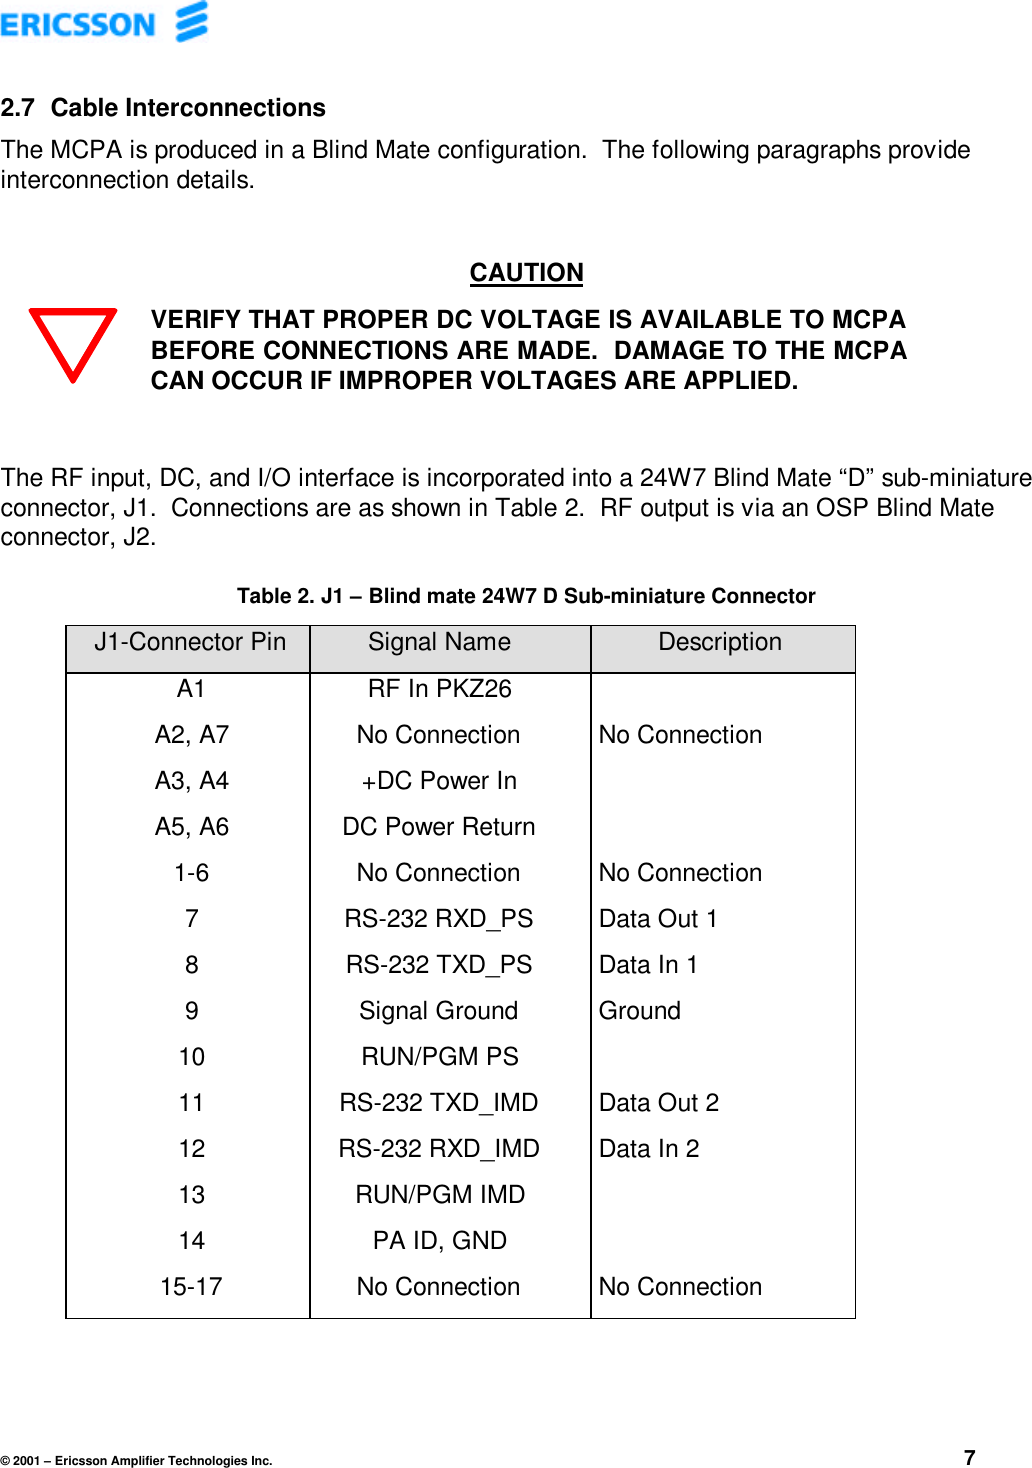 © 2001 – Ericsson Amplifier Technologies Inc. 72.7  Cable InterconnectionsThe MCPA is produced in a Blind Mate configuration.  The following paragraphs provideinterconnection details.CAUTIONVERIFY THAT PROPER DC VOLTAGE IS AVAILABLE TO MCPABEFORE CONNECTIONS ARE MADE.  DAMAGE TO THE MCPACAN OCCUR IF IMPROPER VOLTAGES ARE APPLIED.The RF input, DC, and I/O interface is incorporated into a 24W7 Blind Mate “D” sub-miniatureconnector, J1.  Connections are as shown in Table 2.  RF output is via an OSP Blind Mateconnector, J2.Table 2. J1 – Blind mate 24W7 D Sub-miniature ConnectorJ1-Connector Pin Signal Name DescriptionA1 RF In PKZ26A2, A7 No Connection No ConnectionA3, A4 +DC Power InA5, A6 DC Power Return1-6 No Connection No Connection7 RS-232 RXD_PS Data Out 18 RS-232 TXD_PS Data In 19 Signal Ground Ground10 RUN/PGM PS11 RS-232 TXD_IMD Data Out 212 RS-232 RXD_IMD Data In 213 RUN/PGM IMD14 PA ID, GND15-17 No Connection No Connection